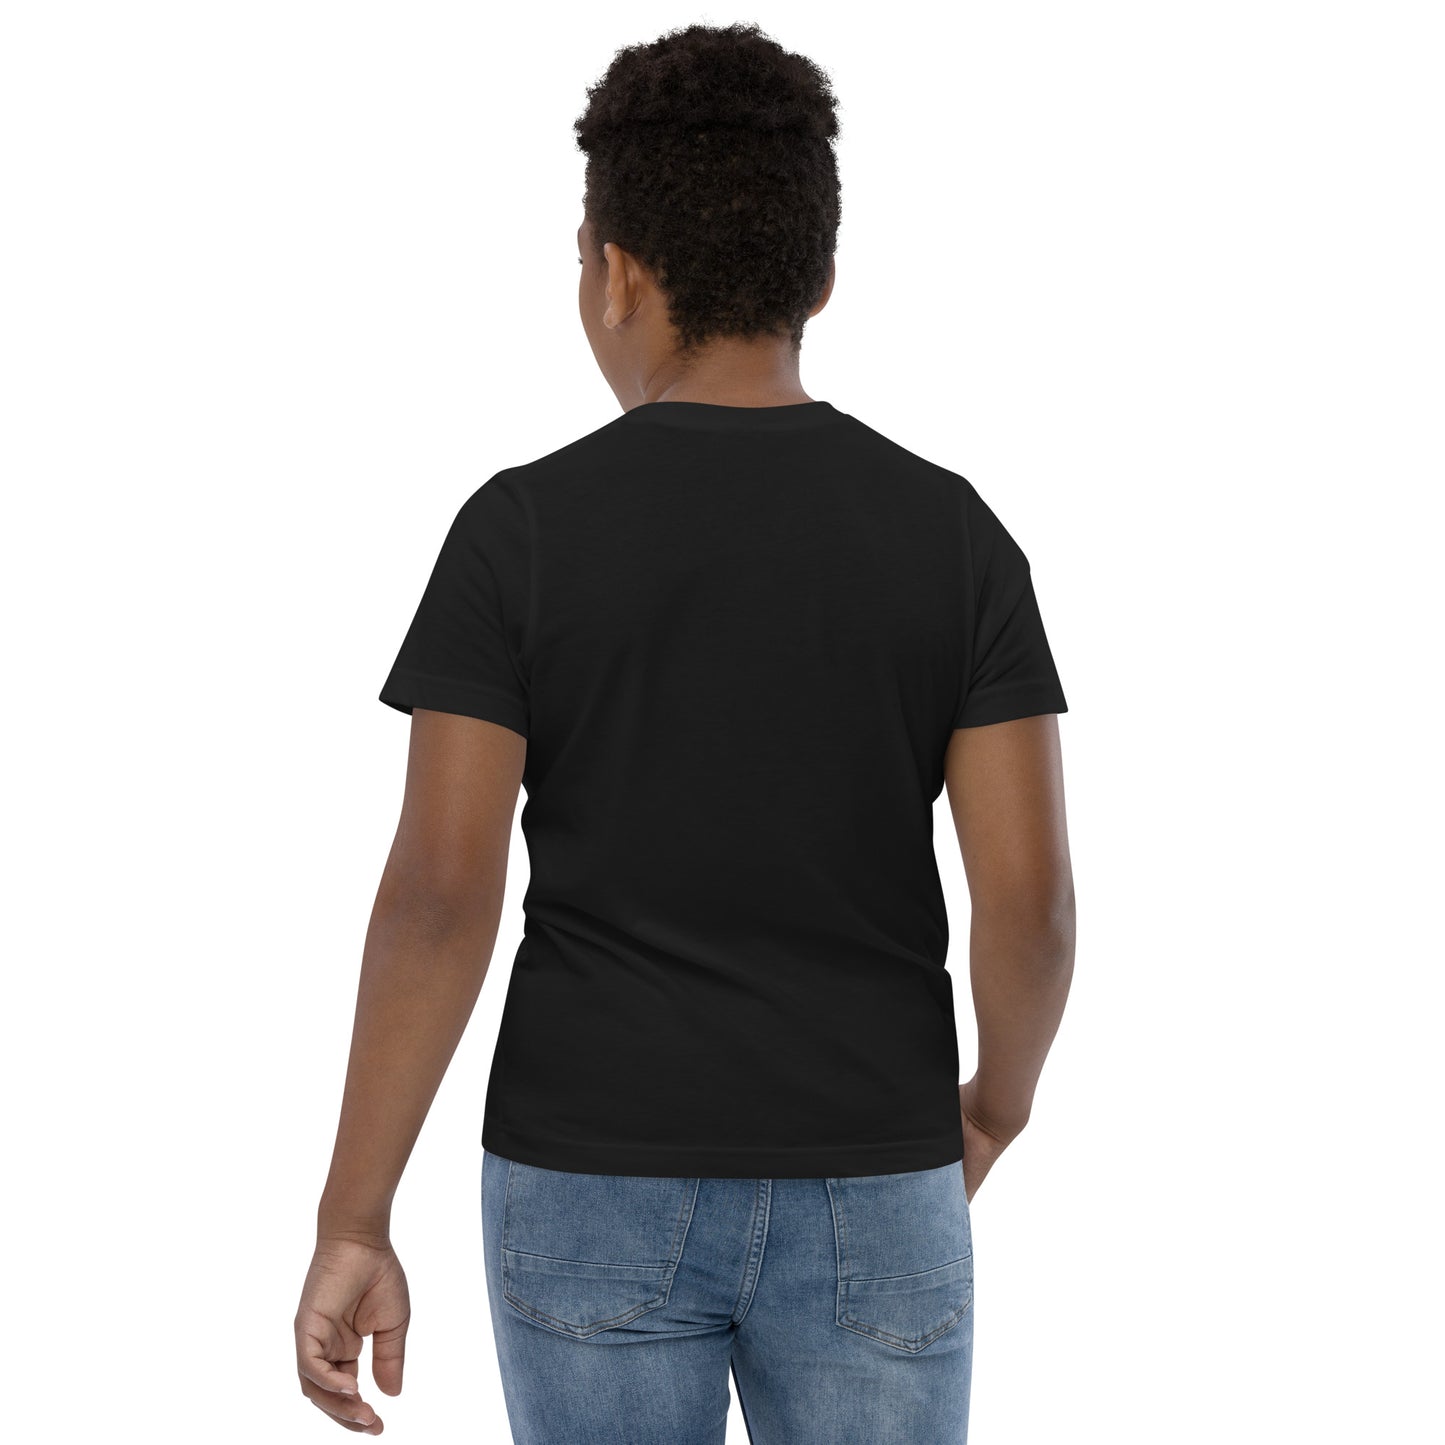  Kids T-Shirt - Black  - Back view, being warn on boy standing with his arms by his side - Go Sea Kayak Byron Bay logo on front - Genuine Byron Bay Merchandise | Produced by Go Sea Kayak Byron Bay 